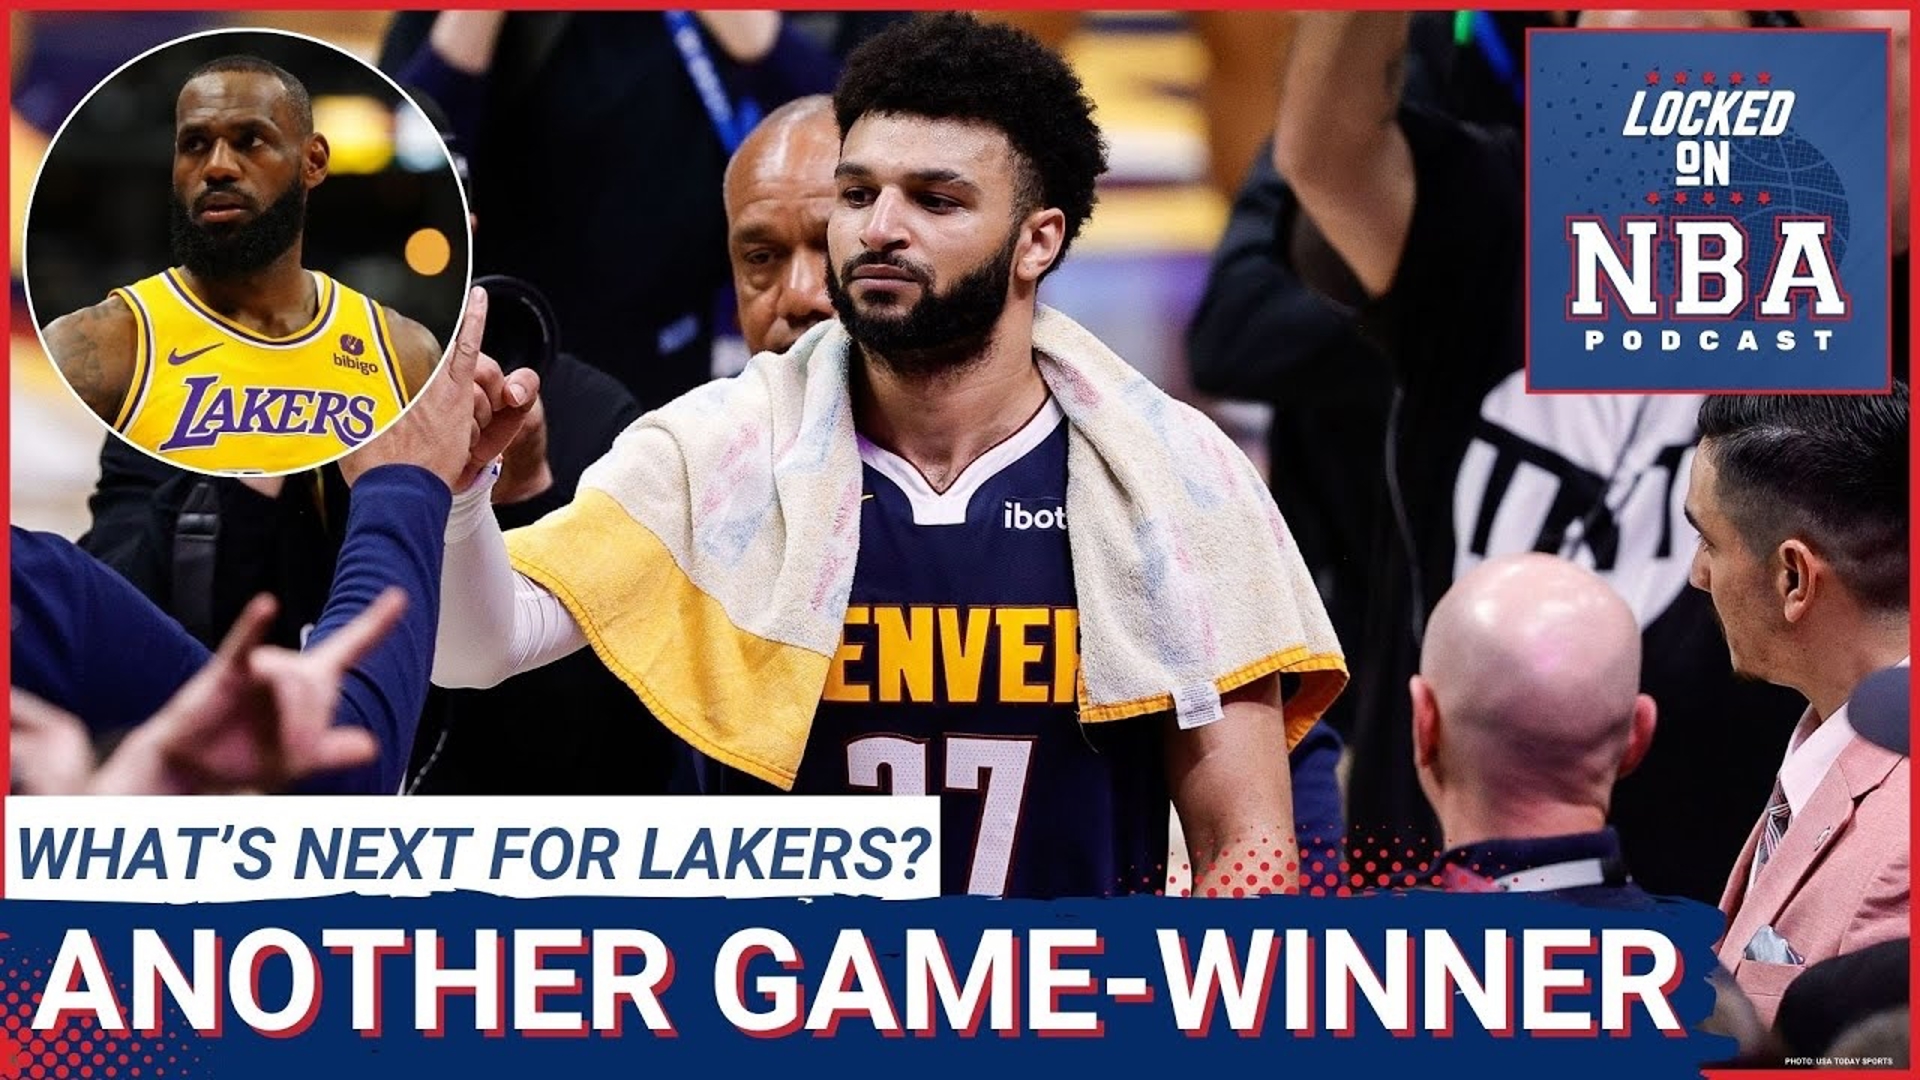 How Jamal Murray Sent the Lakers Home With Another Game-Winner. What's Next for LeBron? | NBA Pod